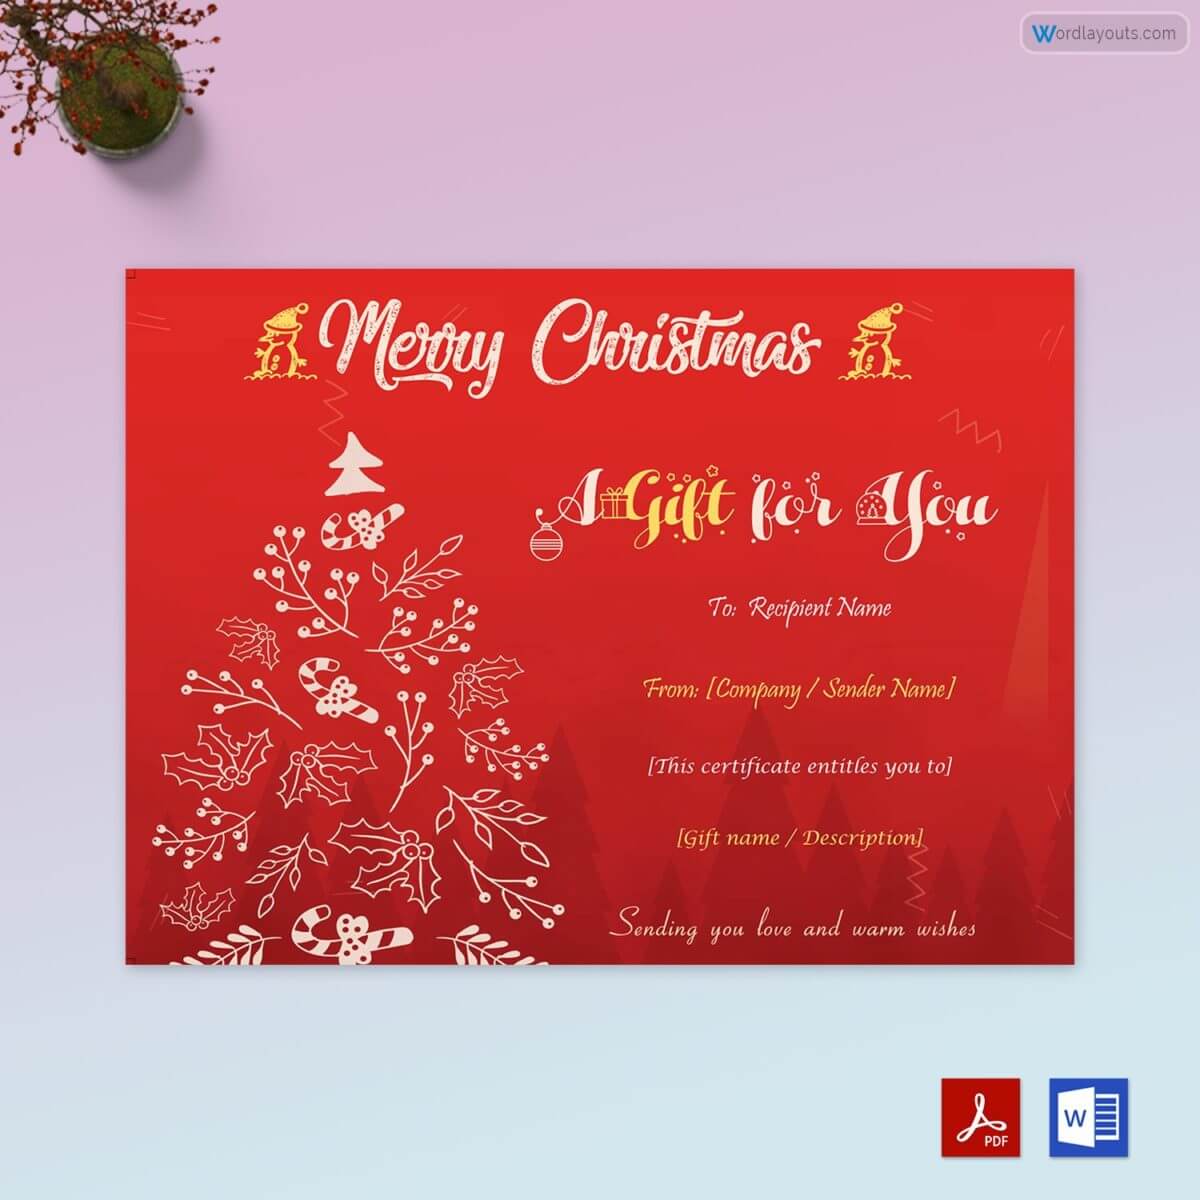 Free Downloadable Christmas Gift Certificate Template 10 for Word, Adobe and AI Format